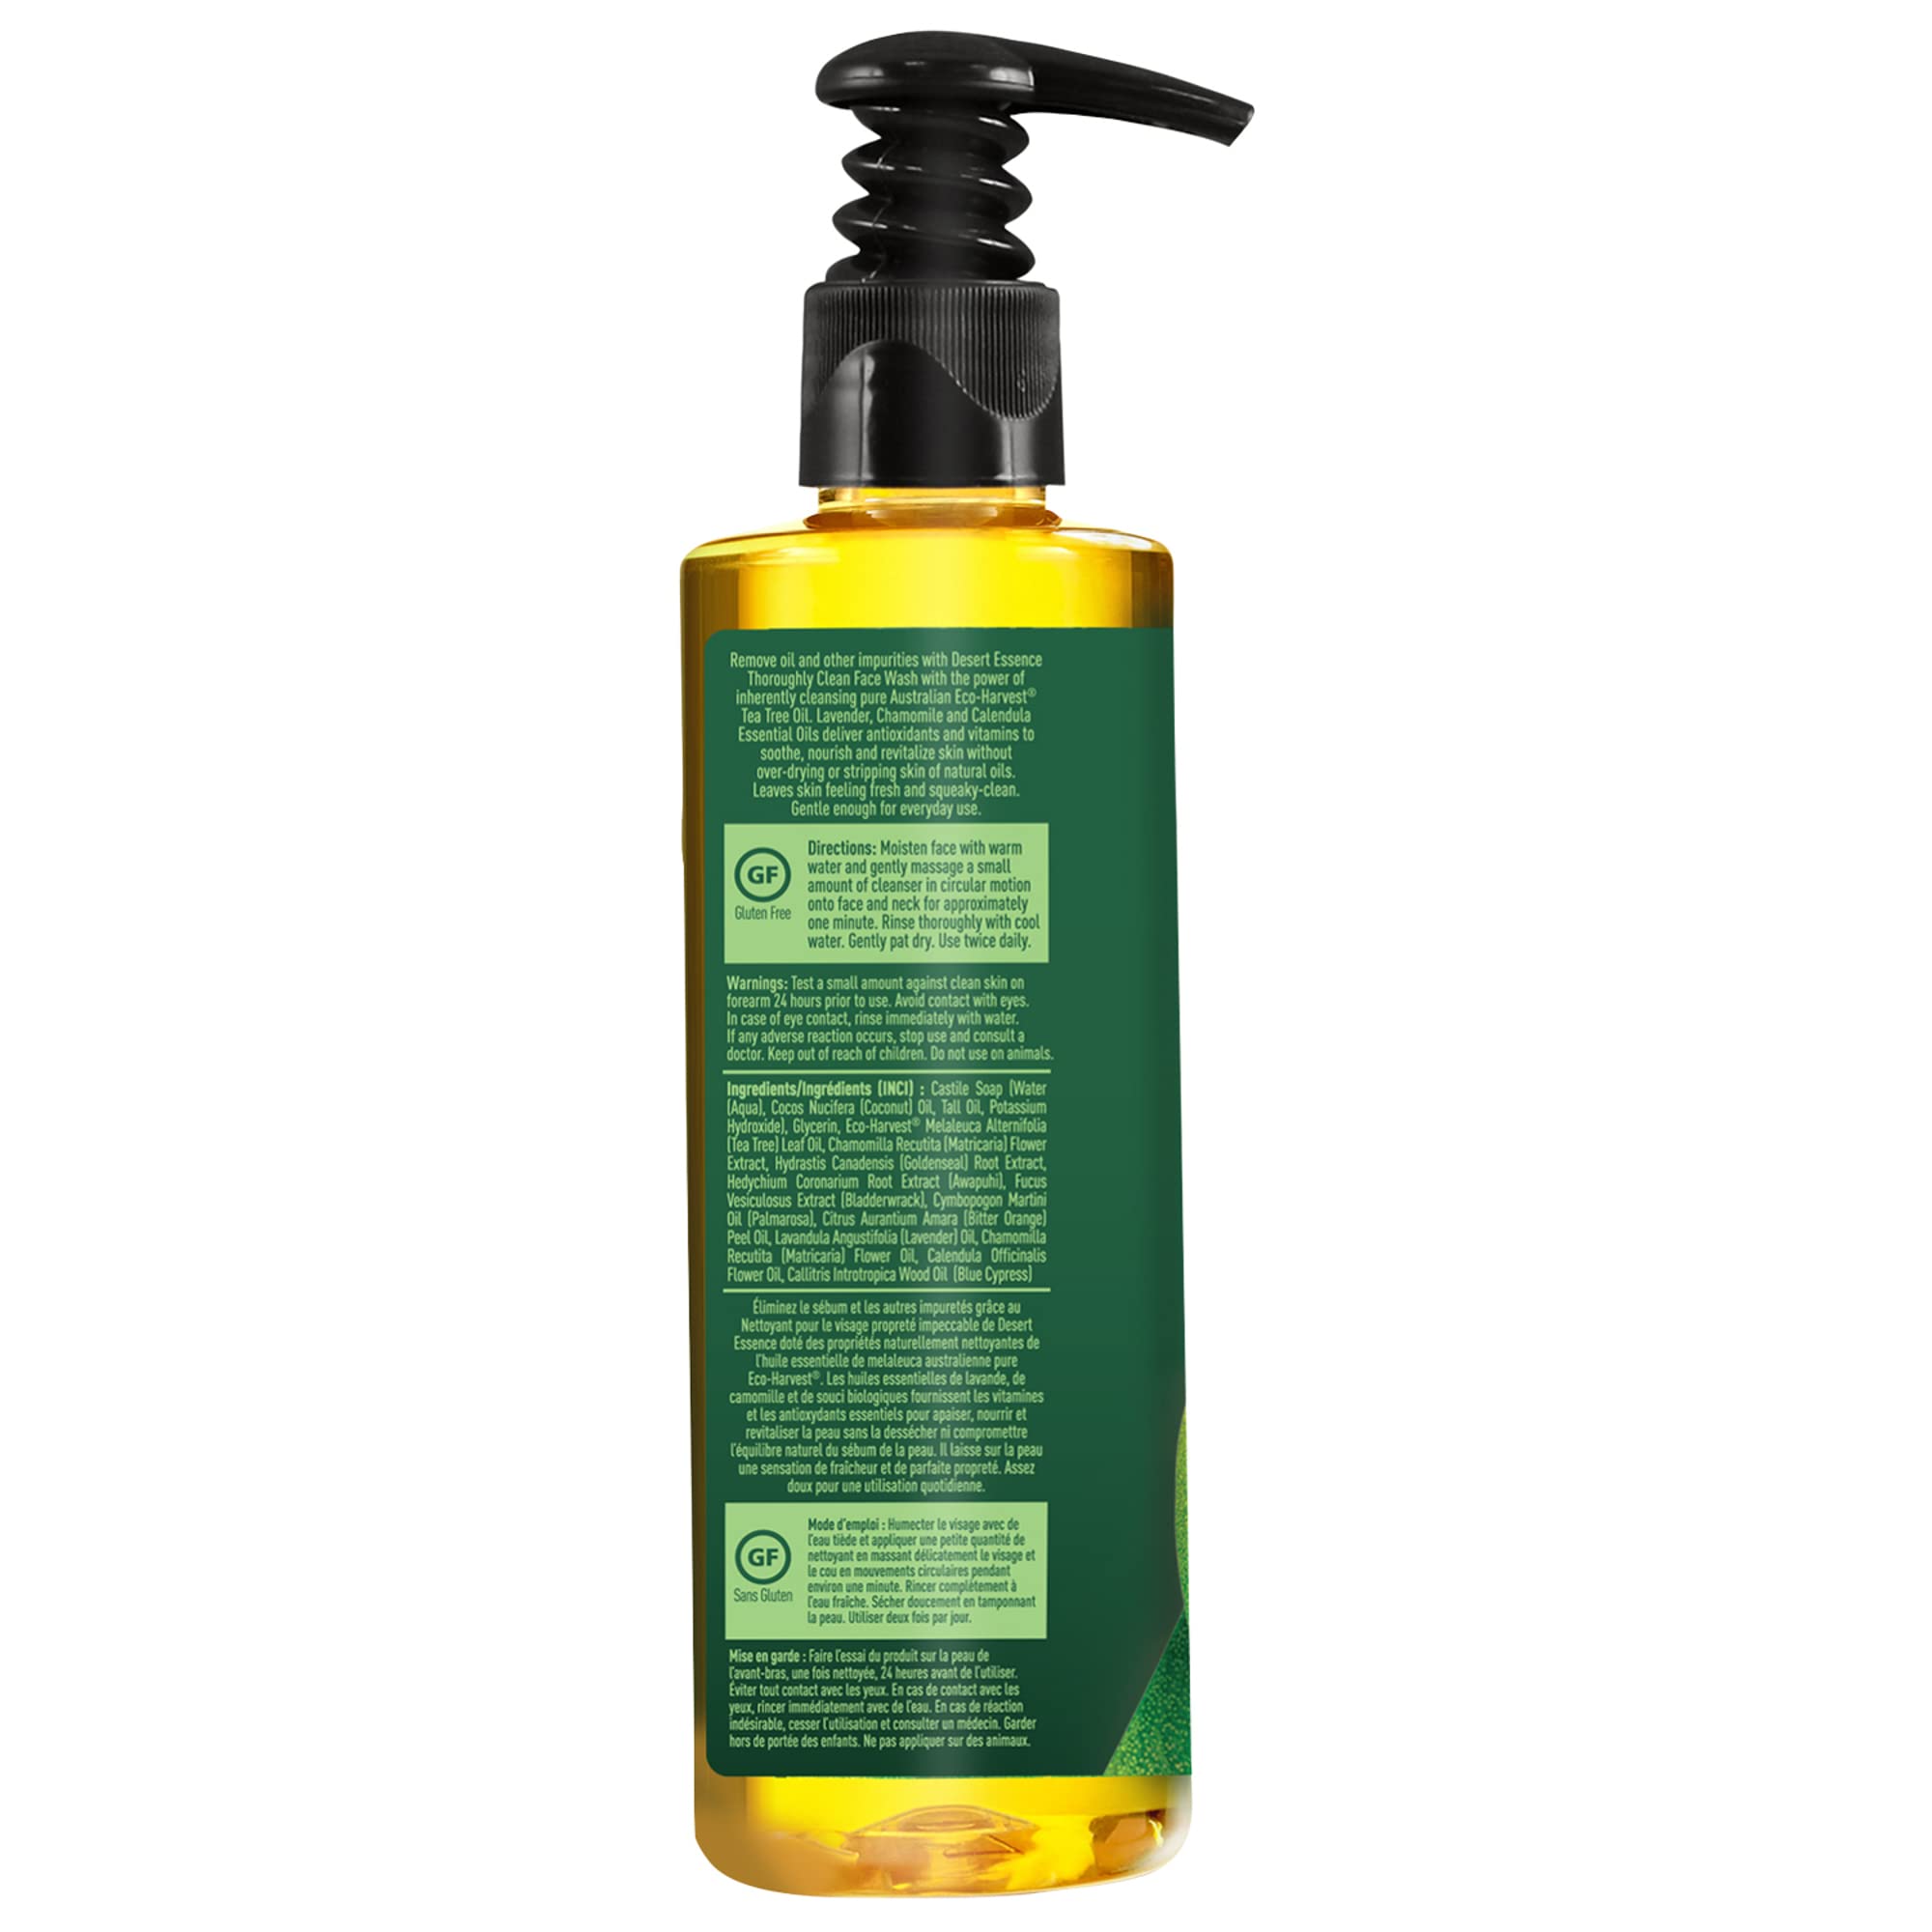 Desert Essence Thoroughly Clean Face Wash - Original - 8.5 Fl Ounce - Tea Tree Oil - For Soft Radiant Skin - Gentle Cleanser - Extracts Of Goldenseal, Awapuhi, & Chamomile Essential Oils